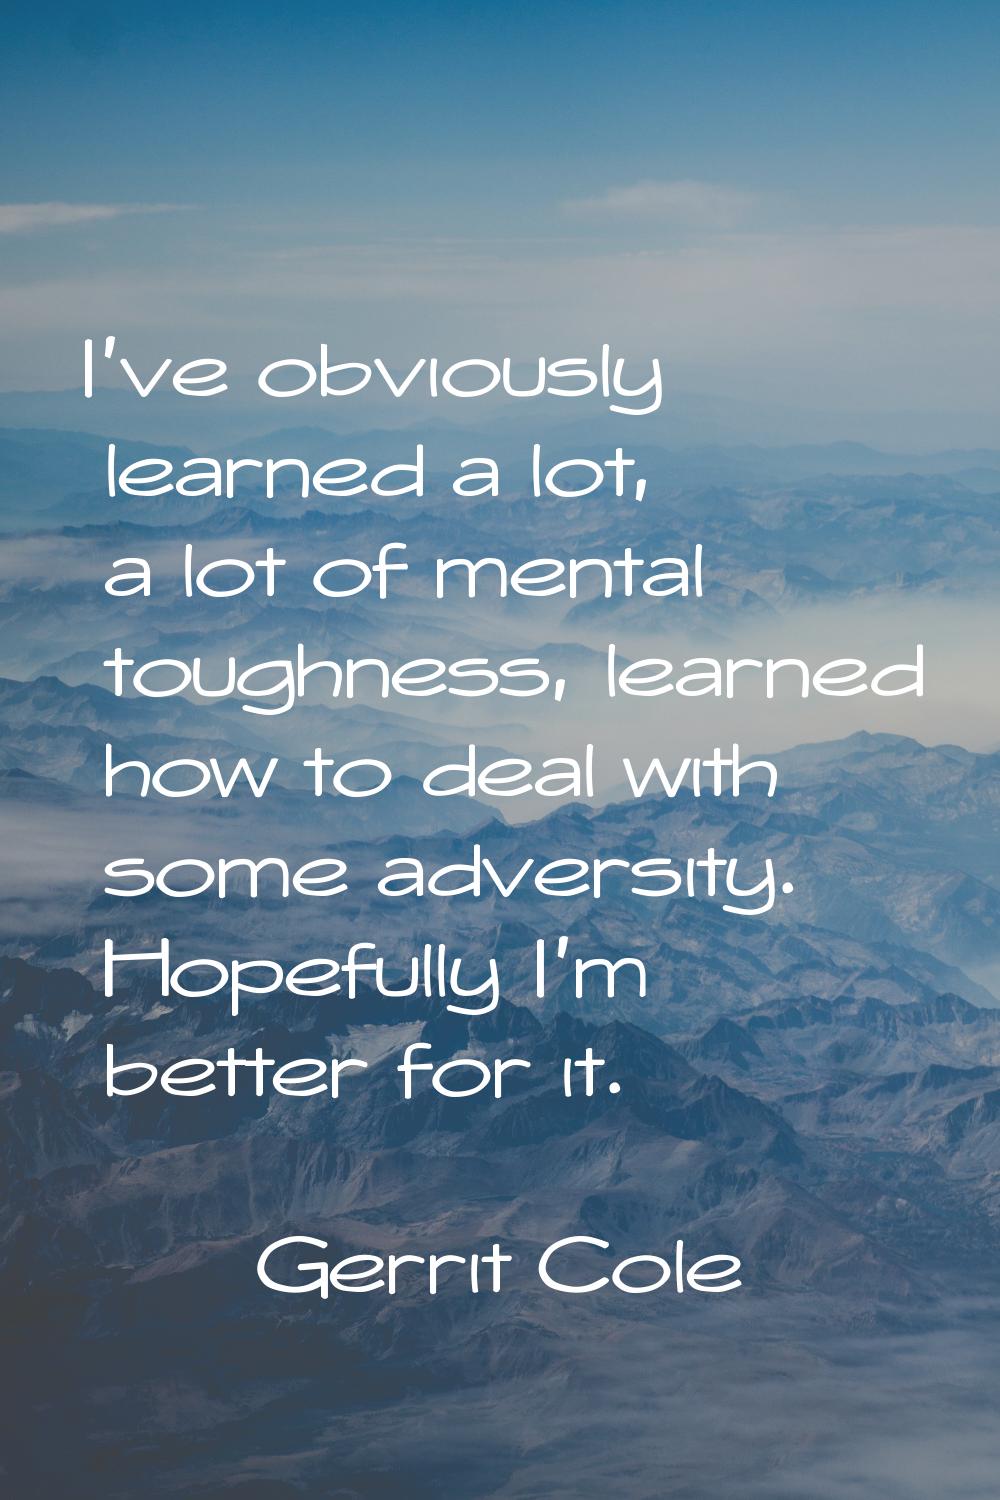 I've obviously learned a lot, a lot of mental toughness, learned how to deal with some adversity. H